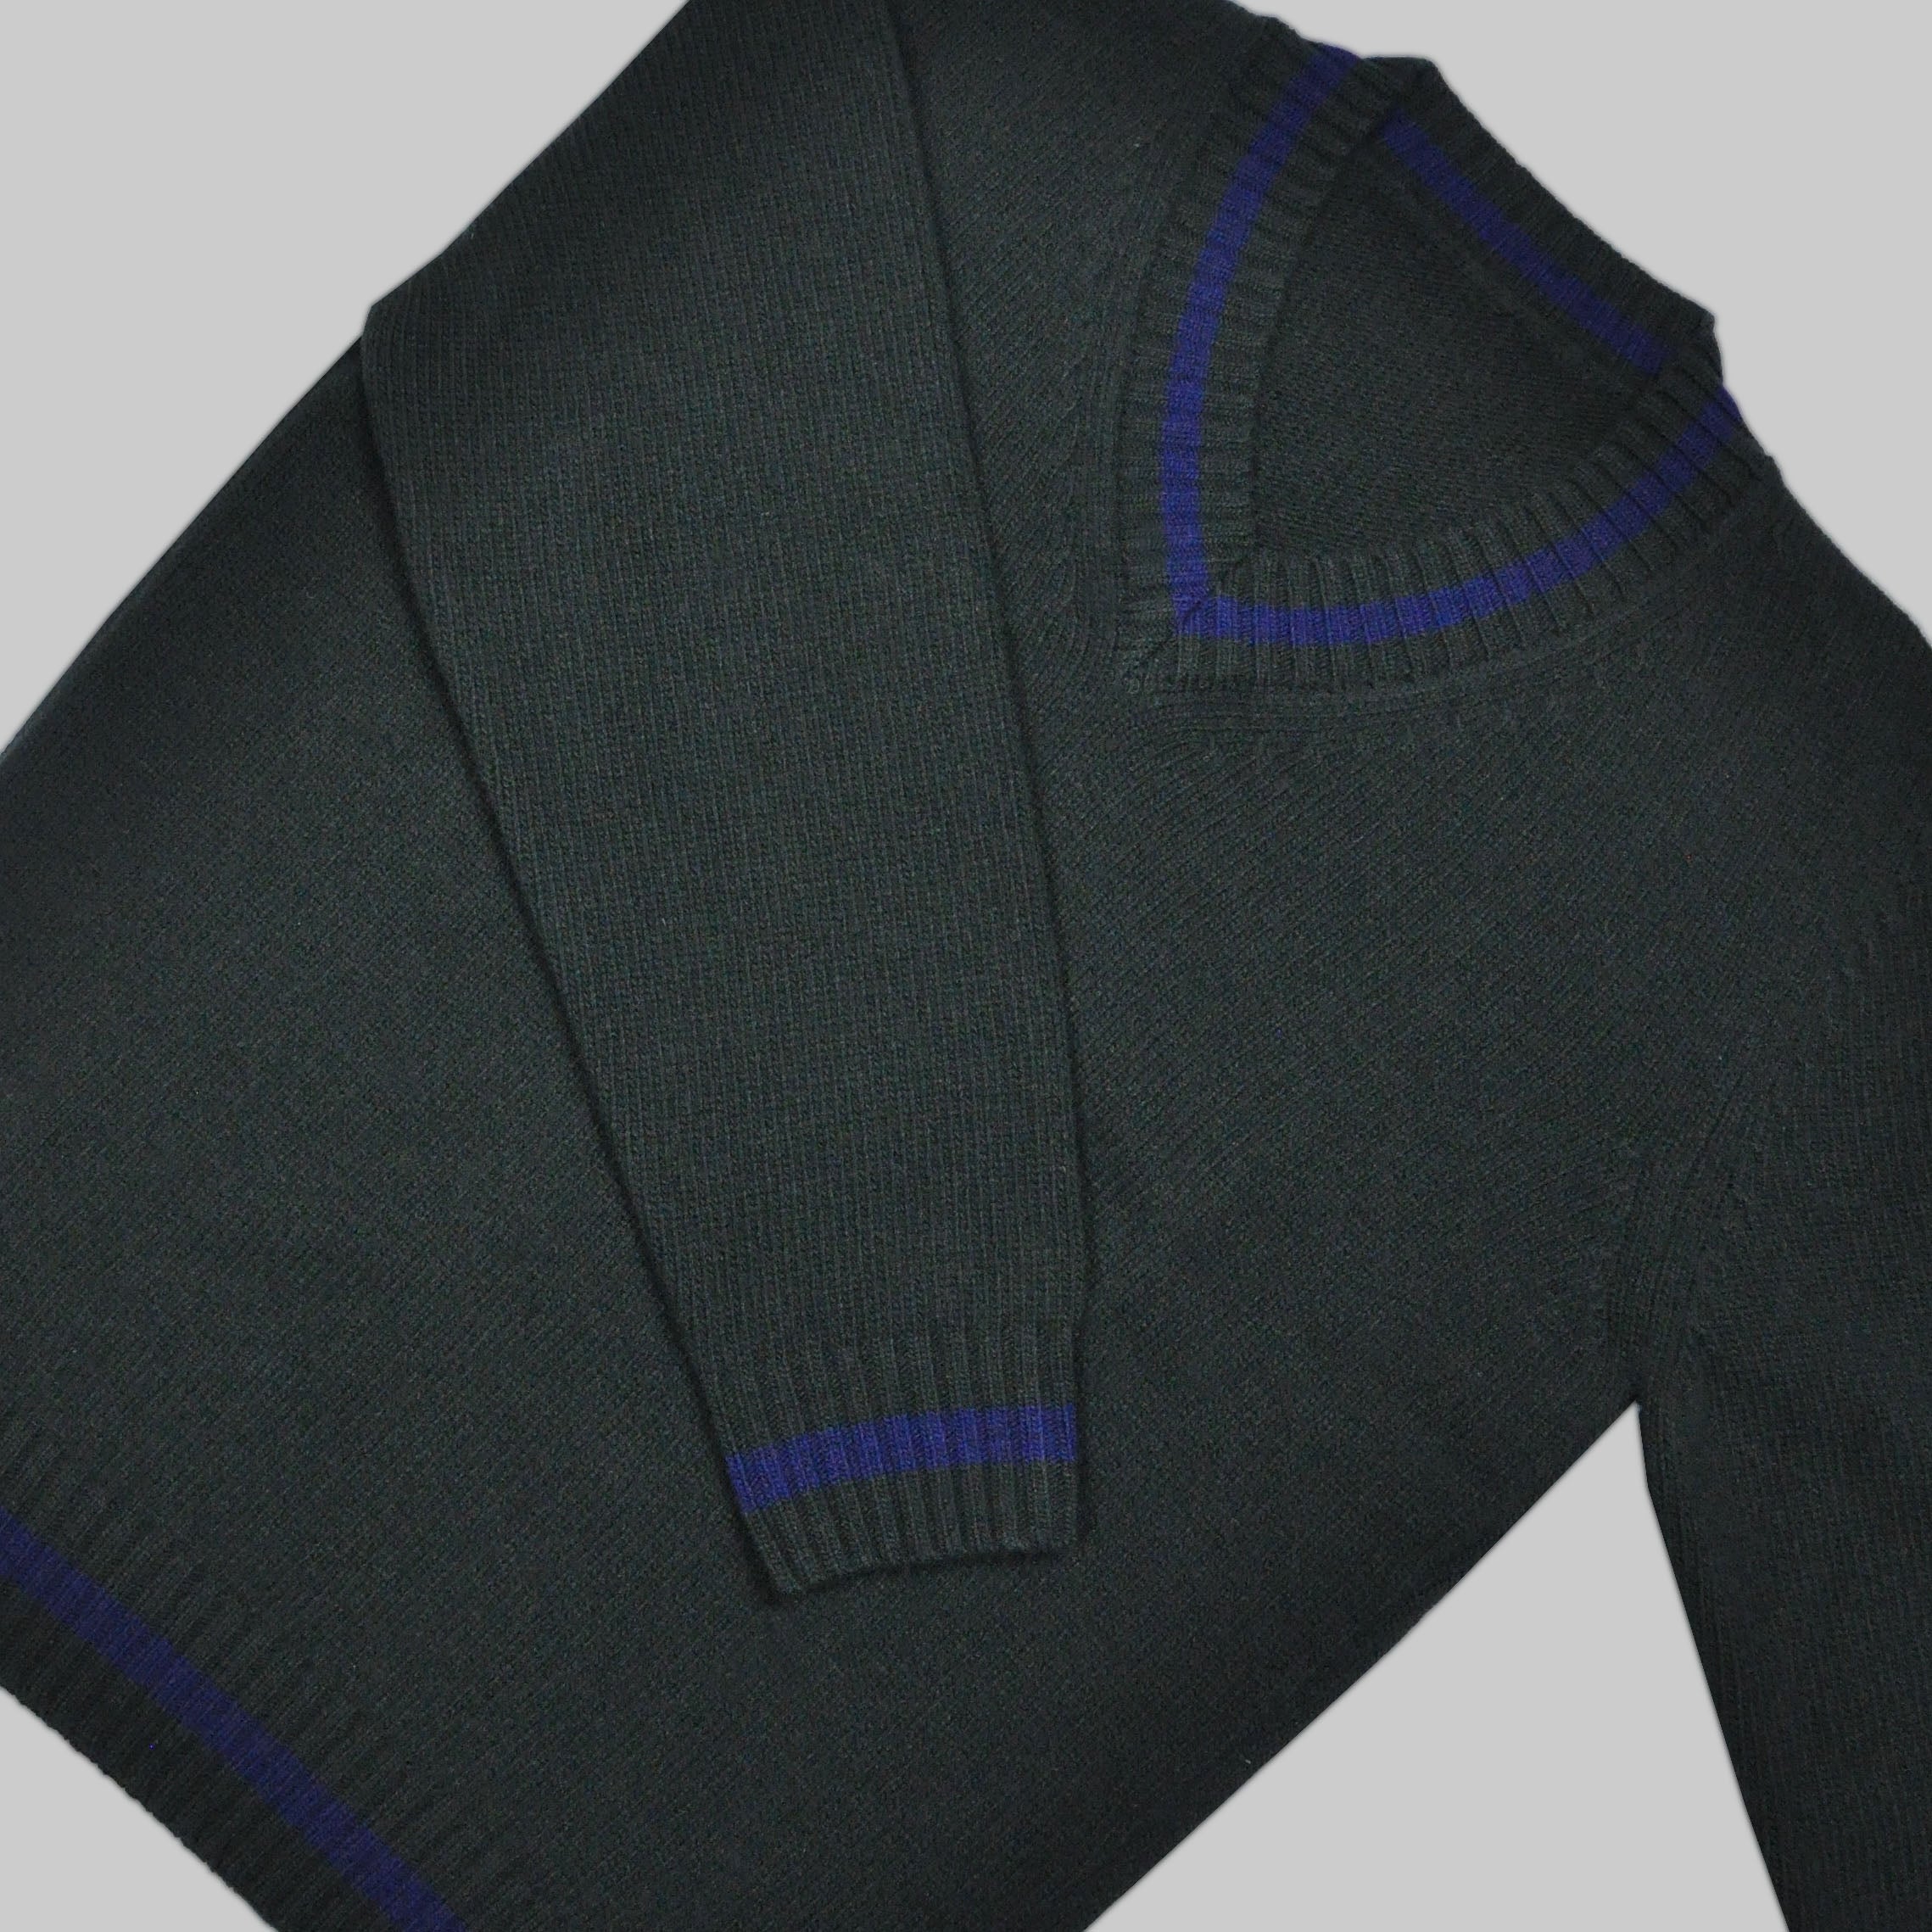 Merino Wool V-Neck Cricket Style Jumper in Green with Blue Trim